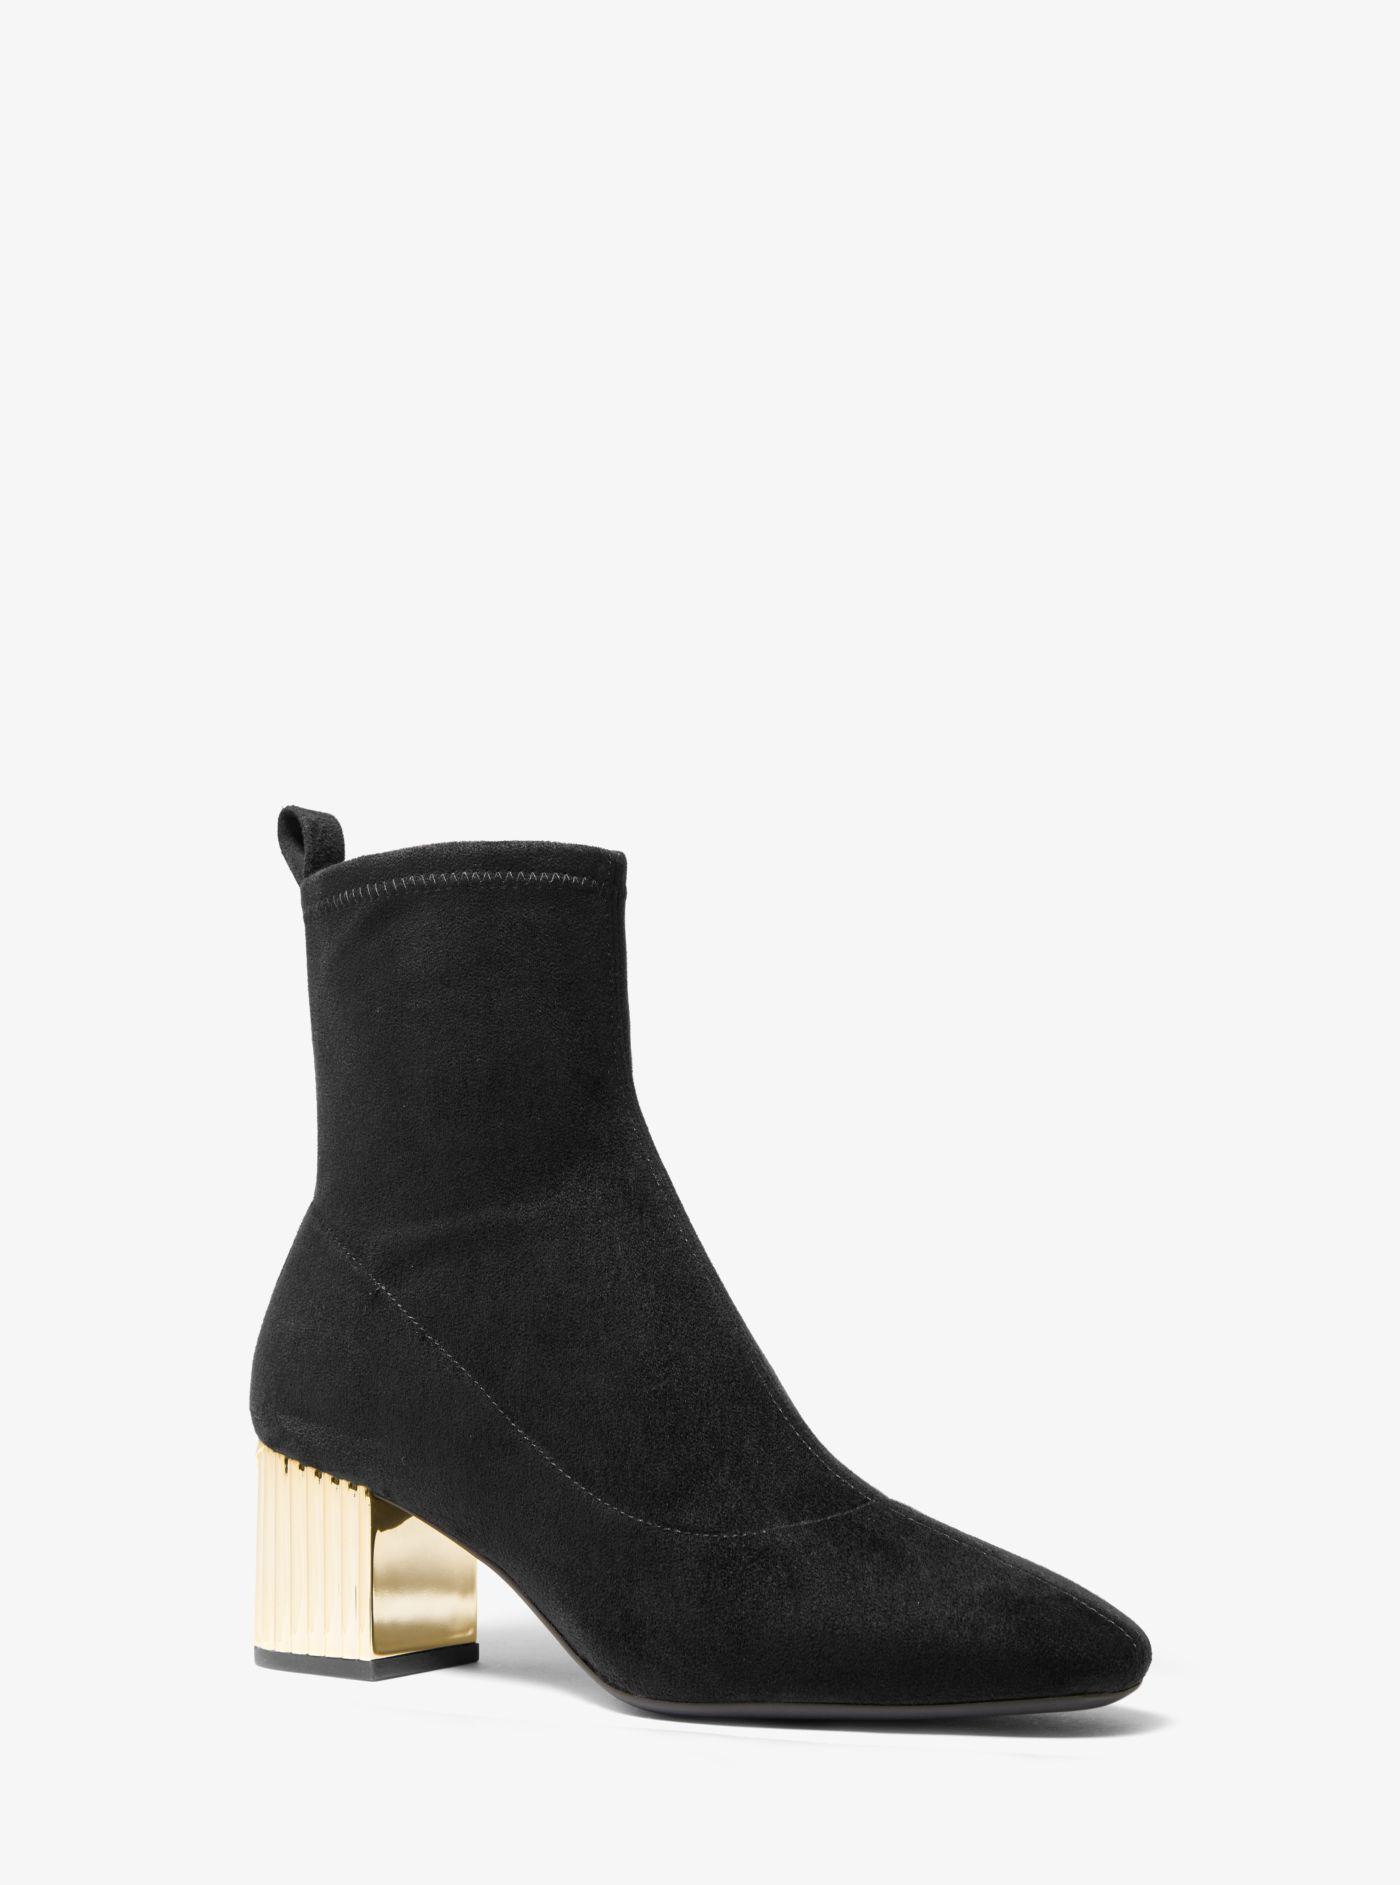 Michael Kors Porter Faux Suede Ankle Boot in Black | Lyst